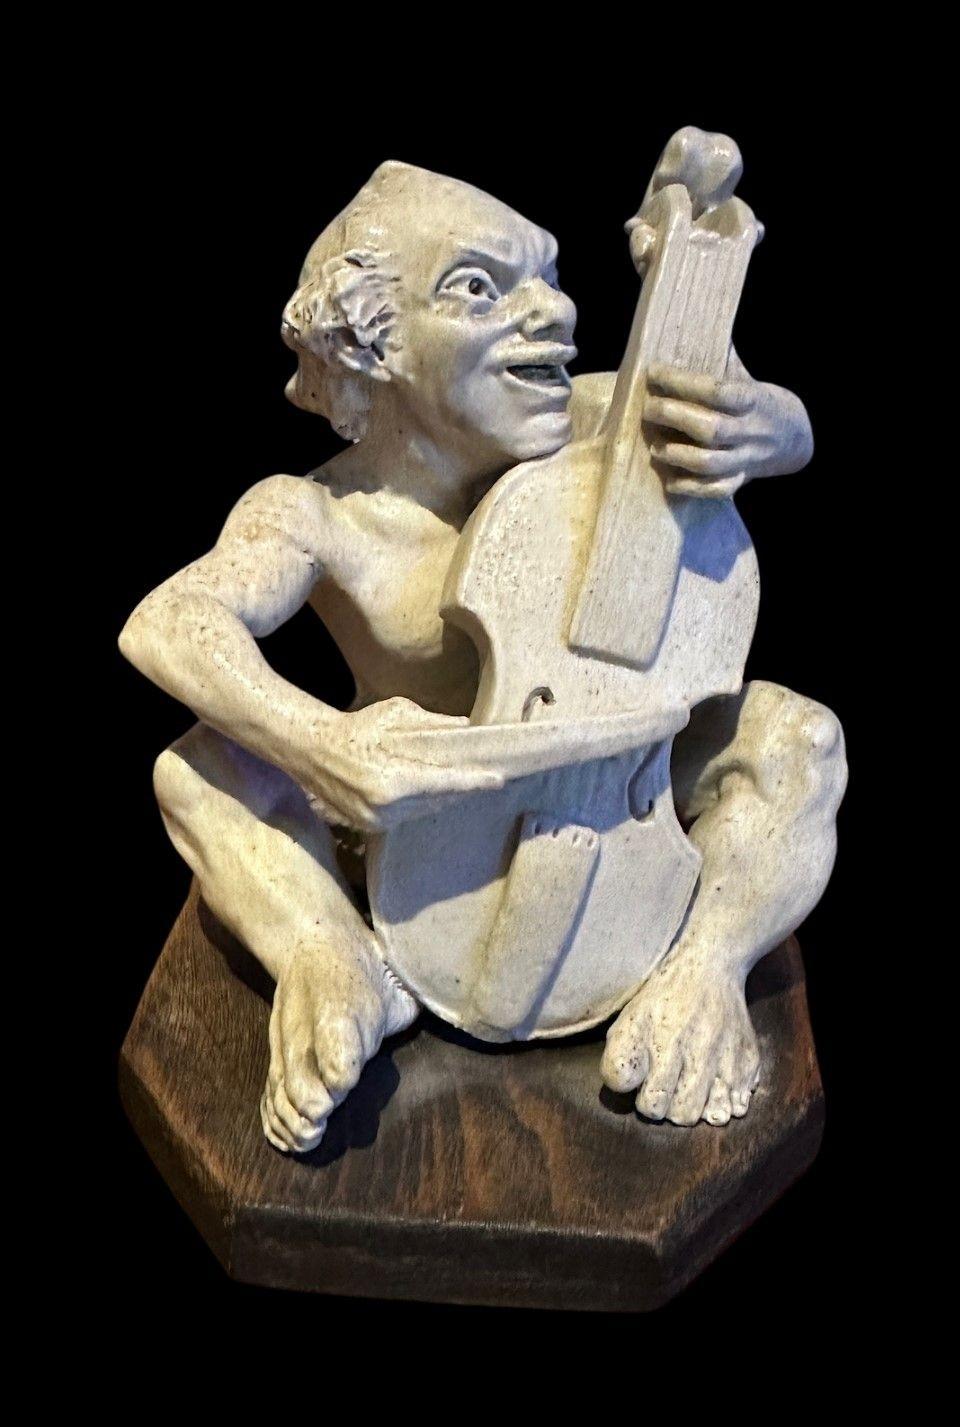 5463
Robert Wallace Martin for the Martin Brothers, a stoneware Musician Imp modelled as a Cellist on a later wooden plinth.
Illustrated in Haslem’s Book “The Martin Brothers Potters”
Minor restoration to two toes
12.5cm high, dated 1906